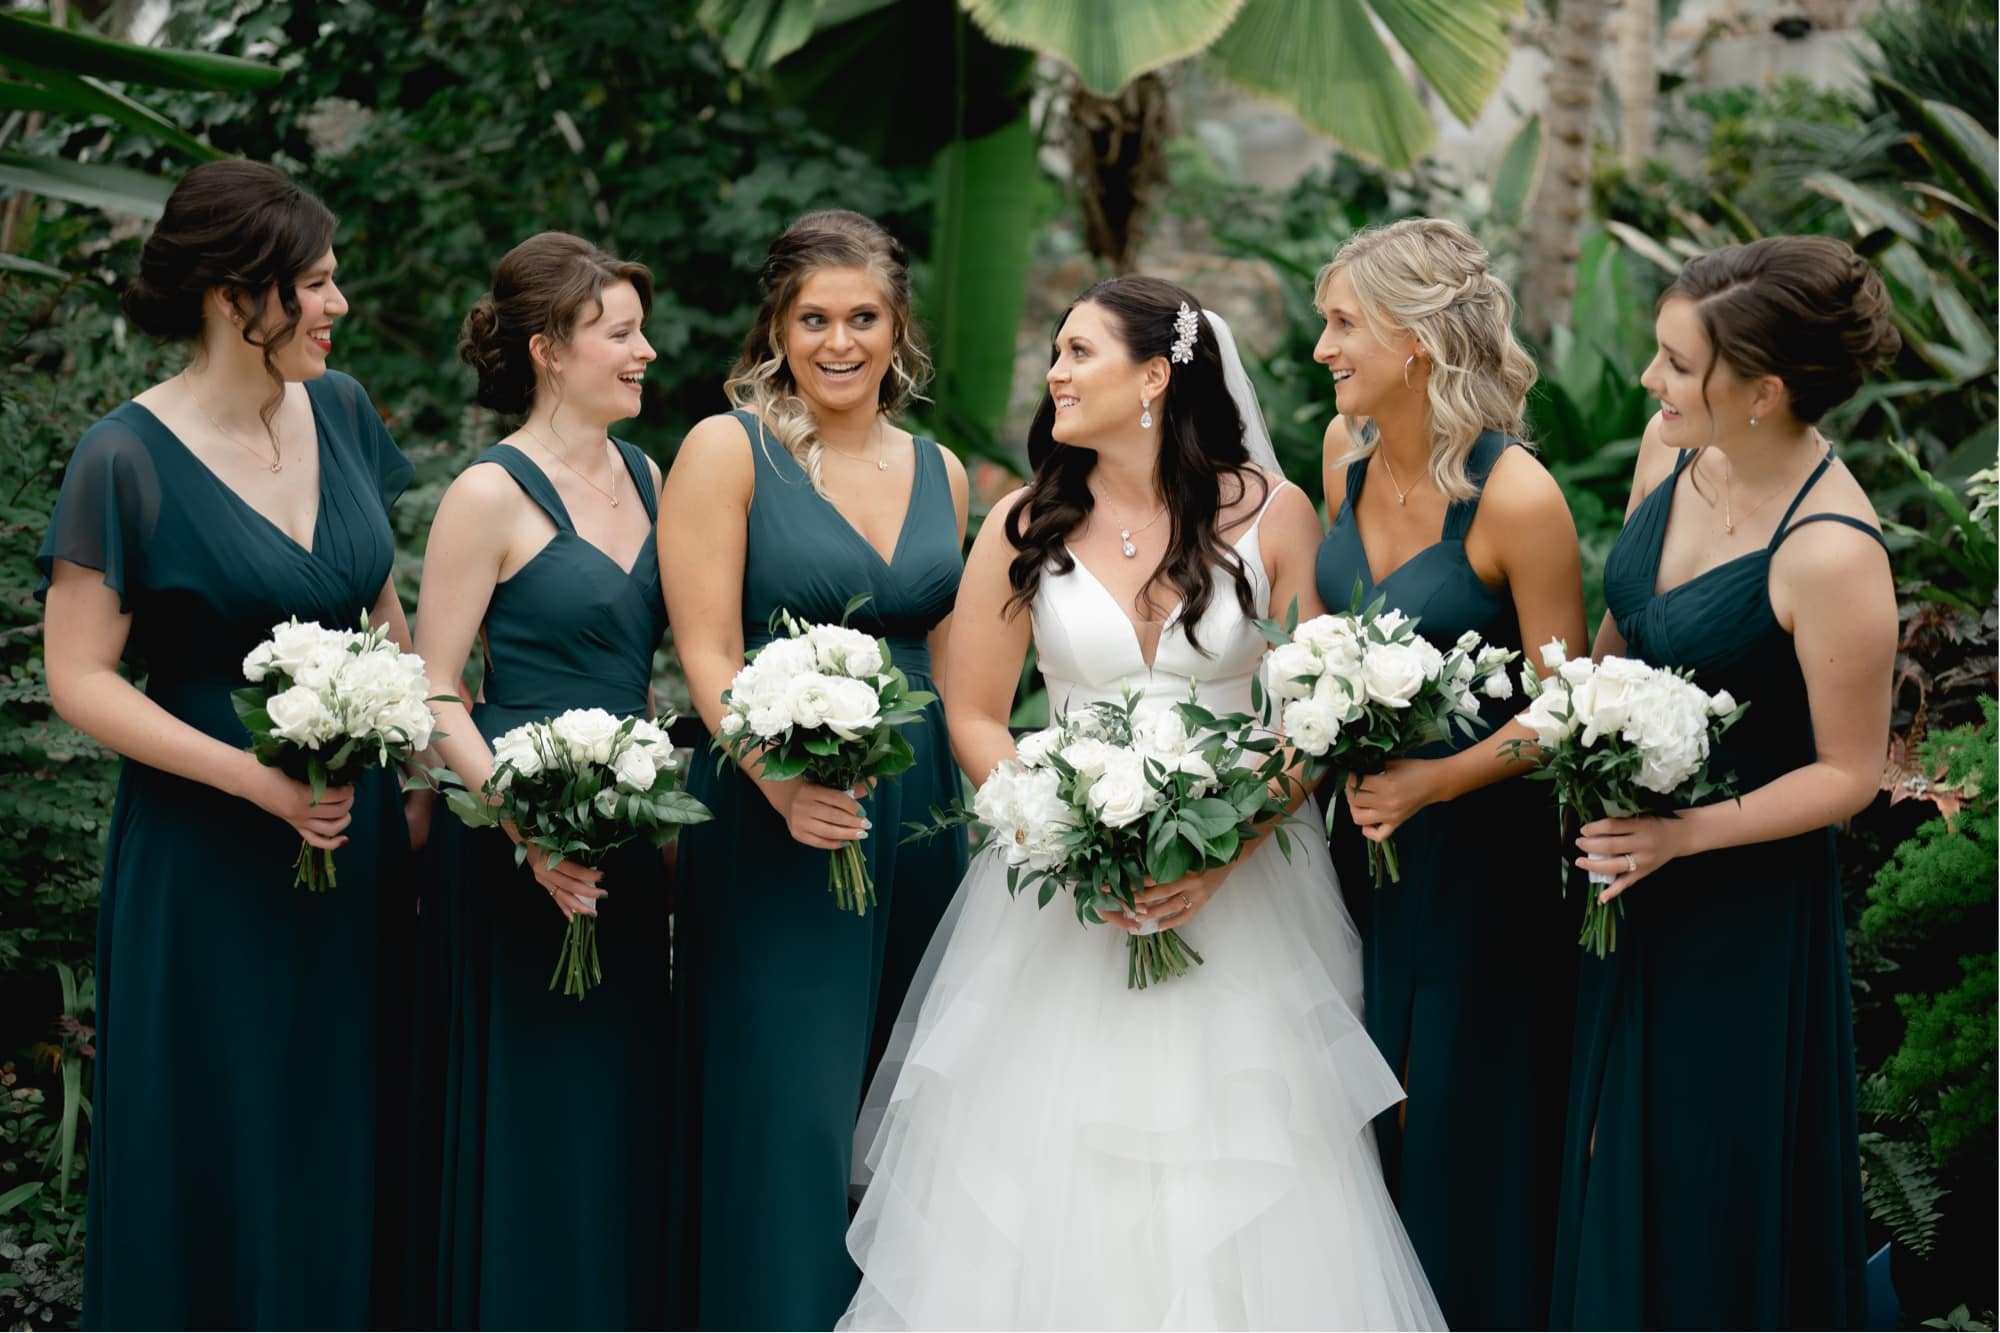 Bride and her bridesmaids smiling inside the Des Moines botanical center